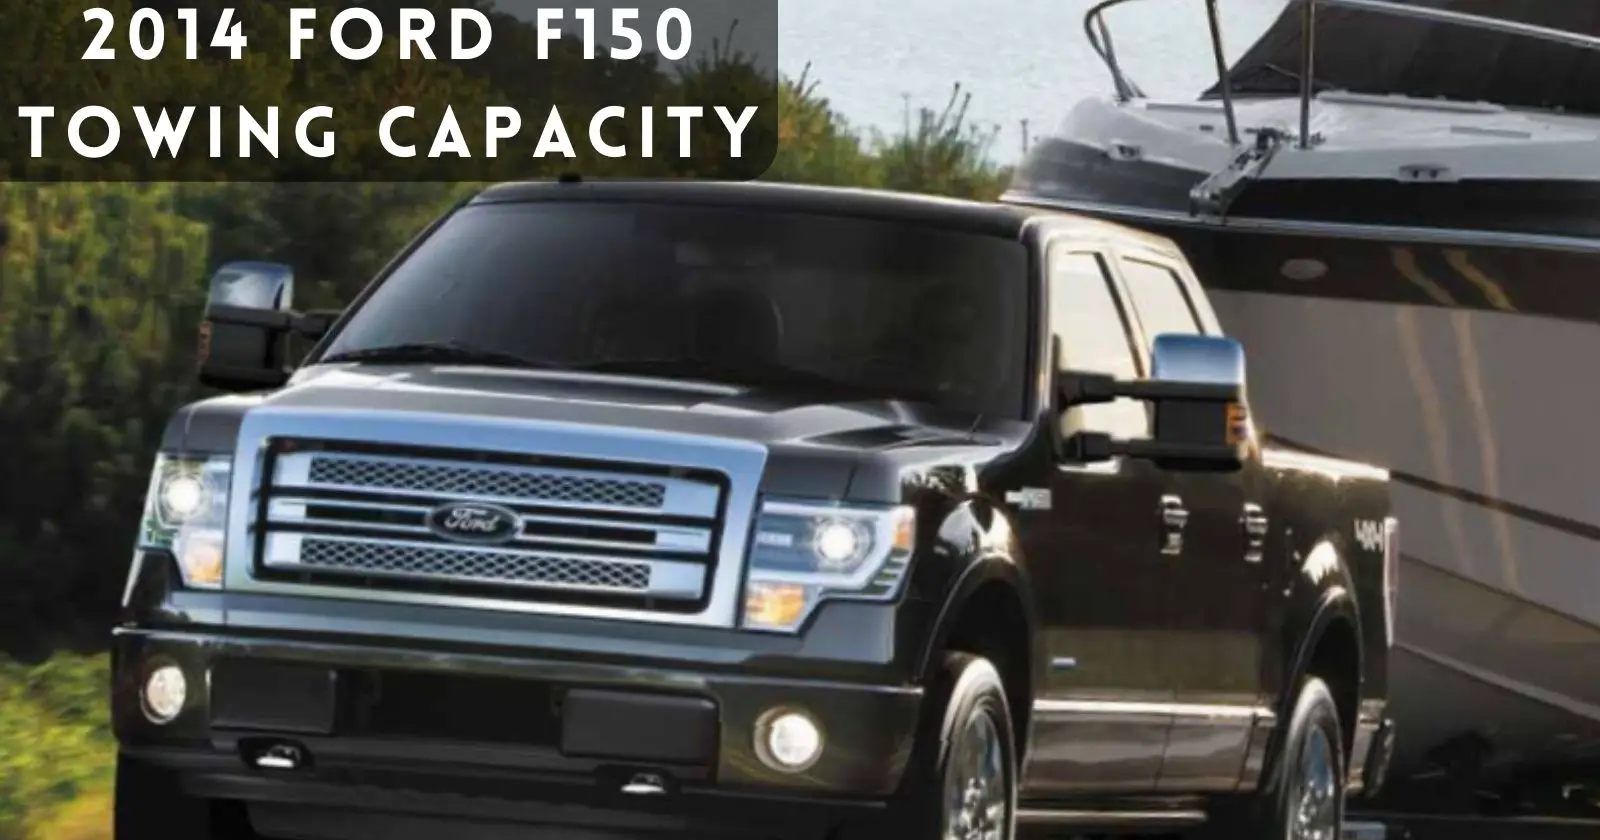 discover-2014-ford-f150-towing-capacity-thecartowing